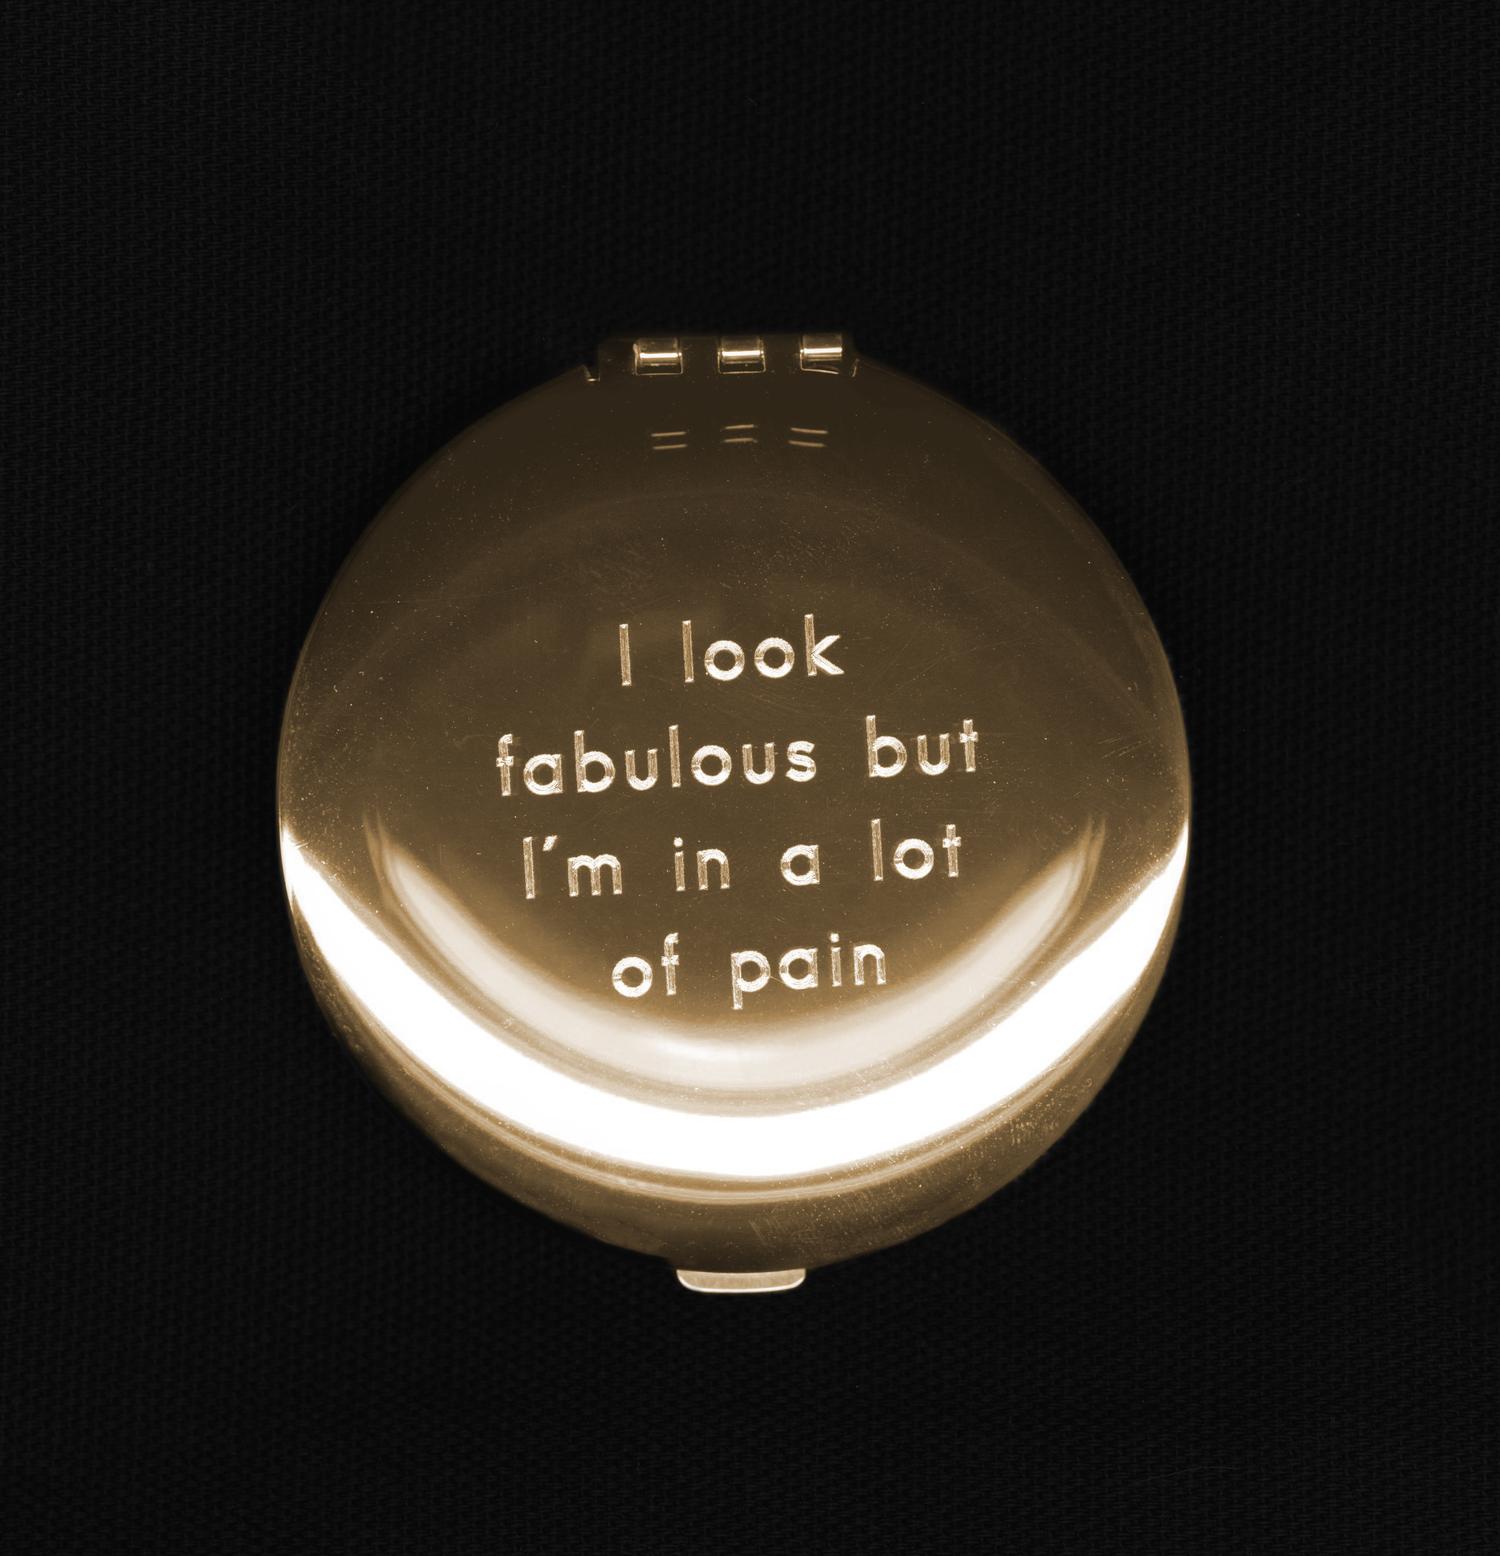 A gold compact mirror is etched to reveal the phrase, “I look fabulous but I’m in a lot of pain”